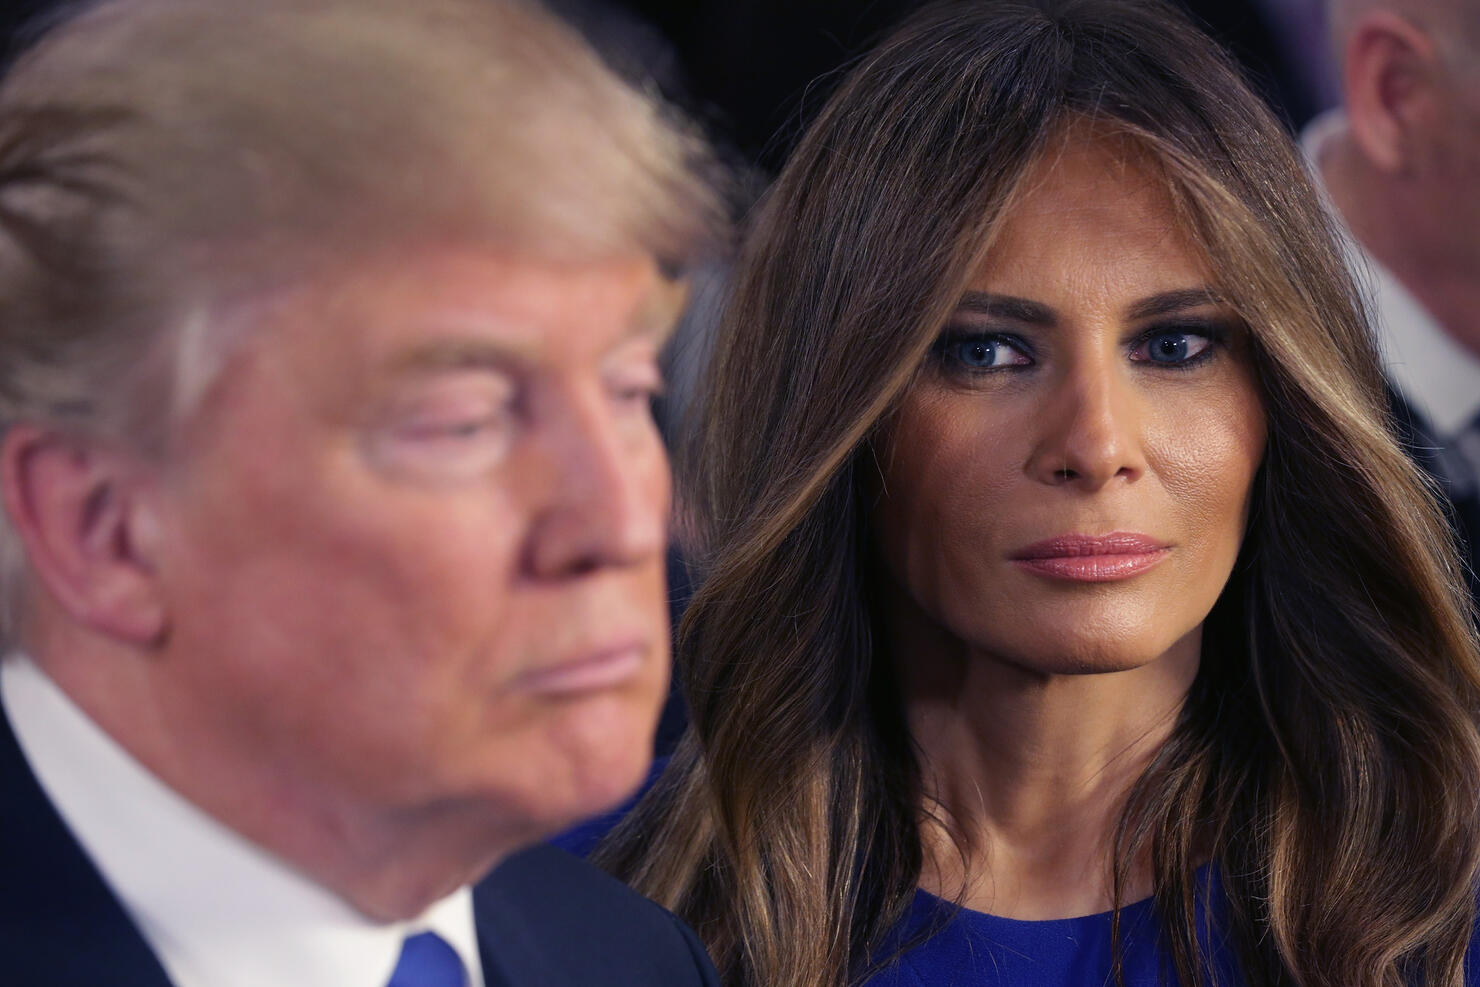 British Newspaper apologizes and will pay damages to Melania Trump for article